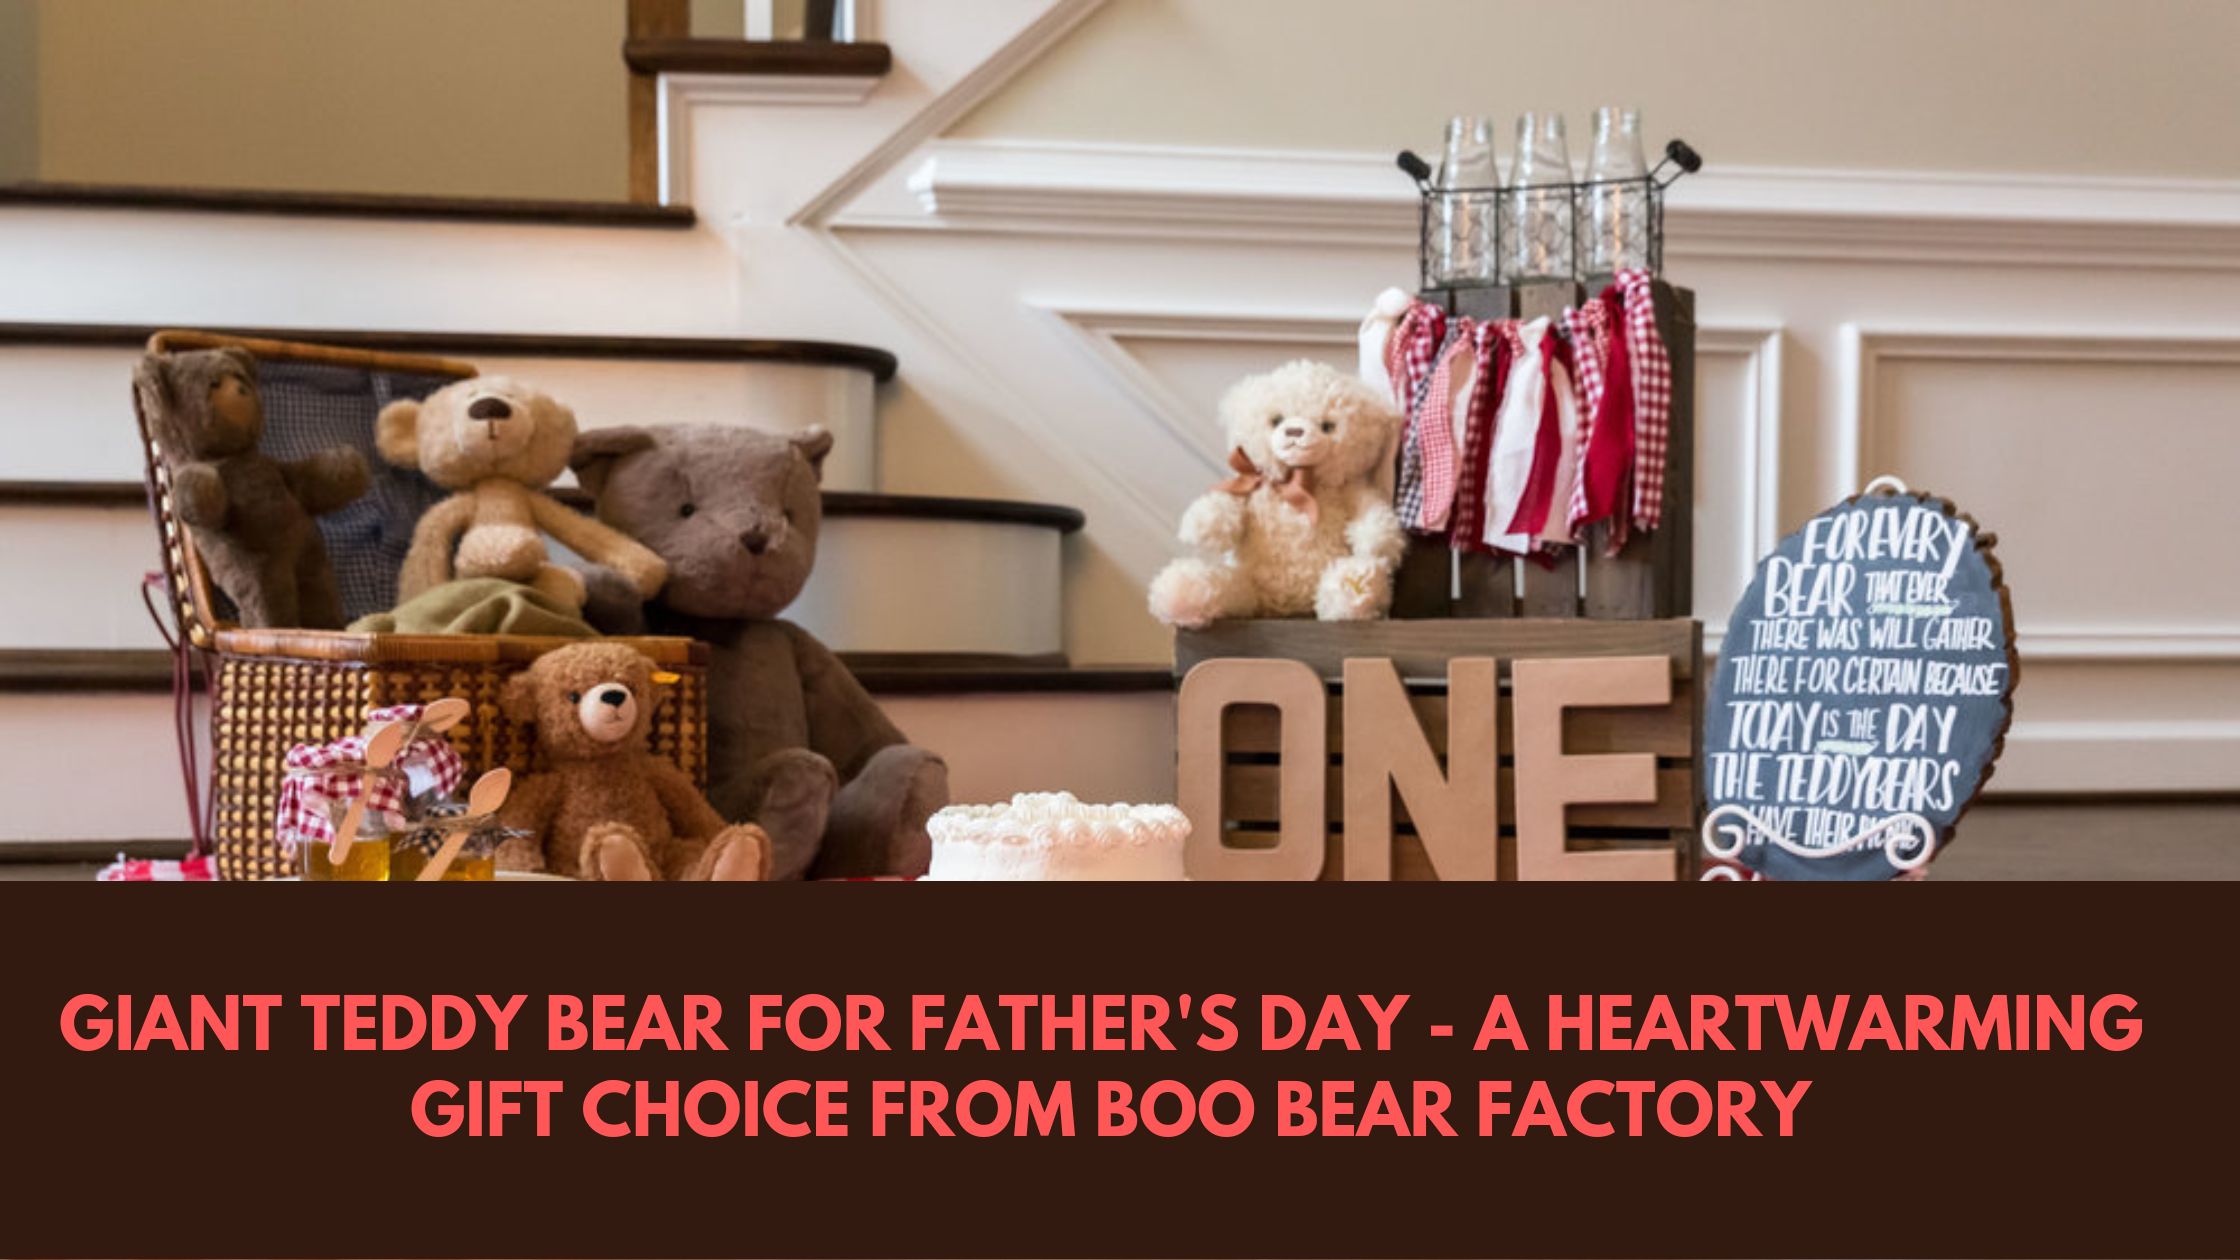 Giant Teddy Bear for Father's Day - A Heartwarming Gift Choice from Boo Bear Factory